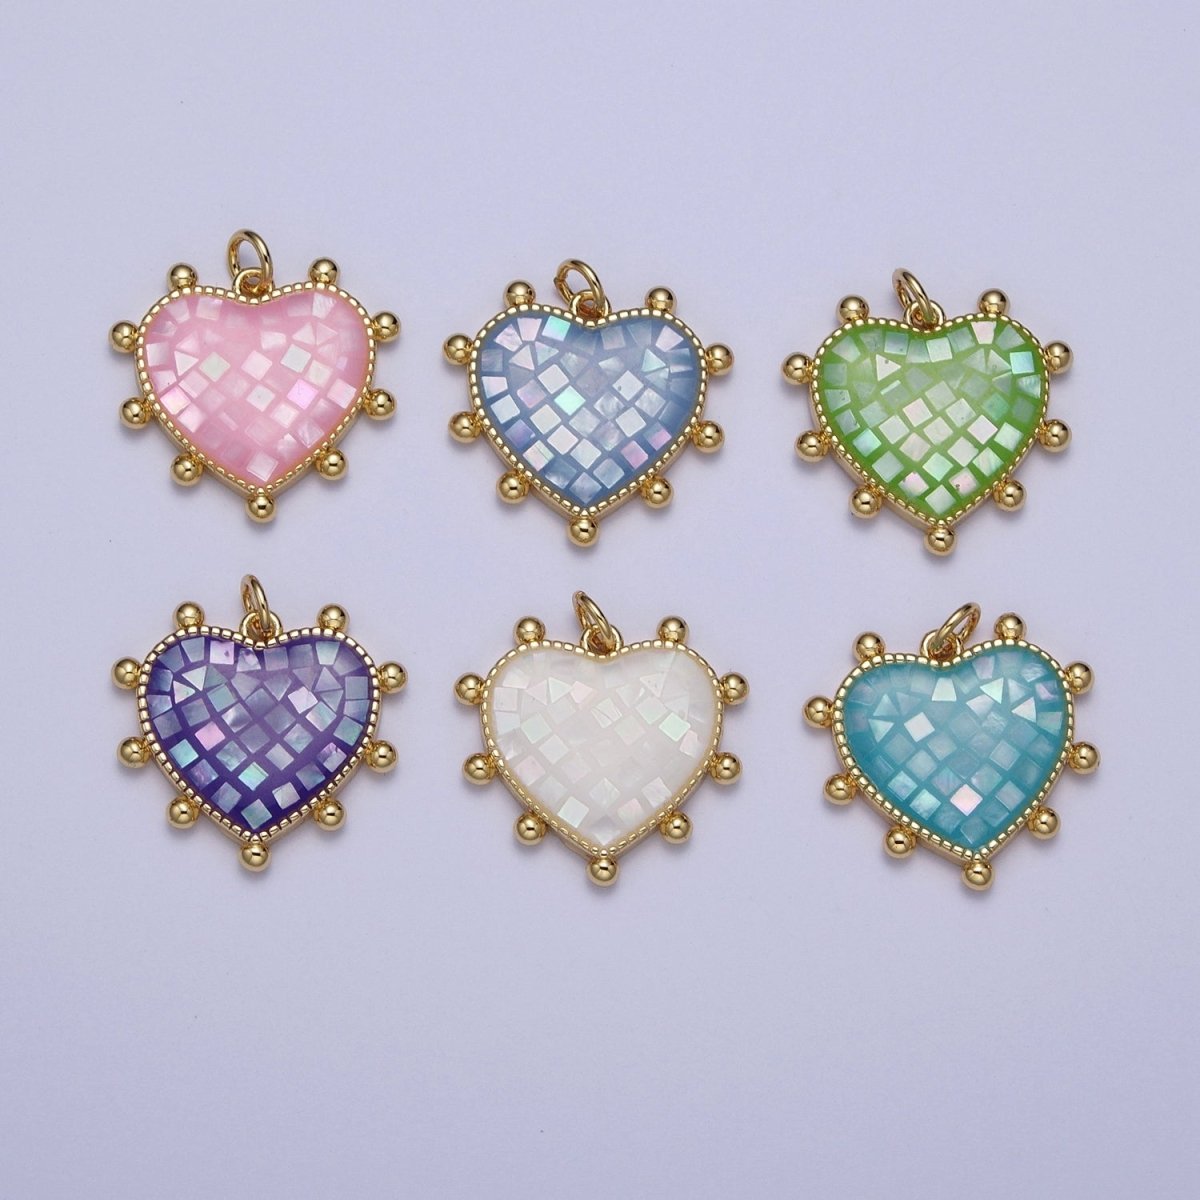 Purple, White, Pink, Teal, Green, Blue Shell Opal Beaded Heart Love Charm For Jewelry Making AG-062~AG-067 - DLUXCA